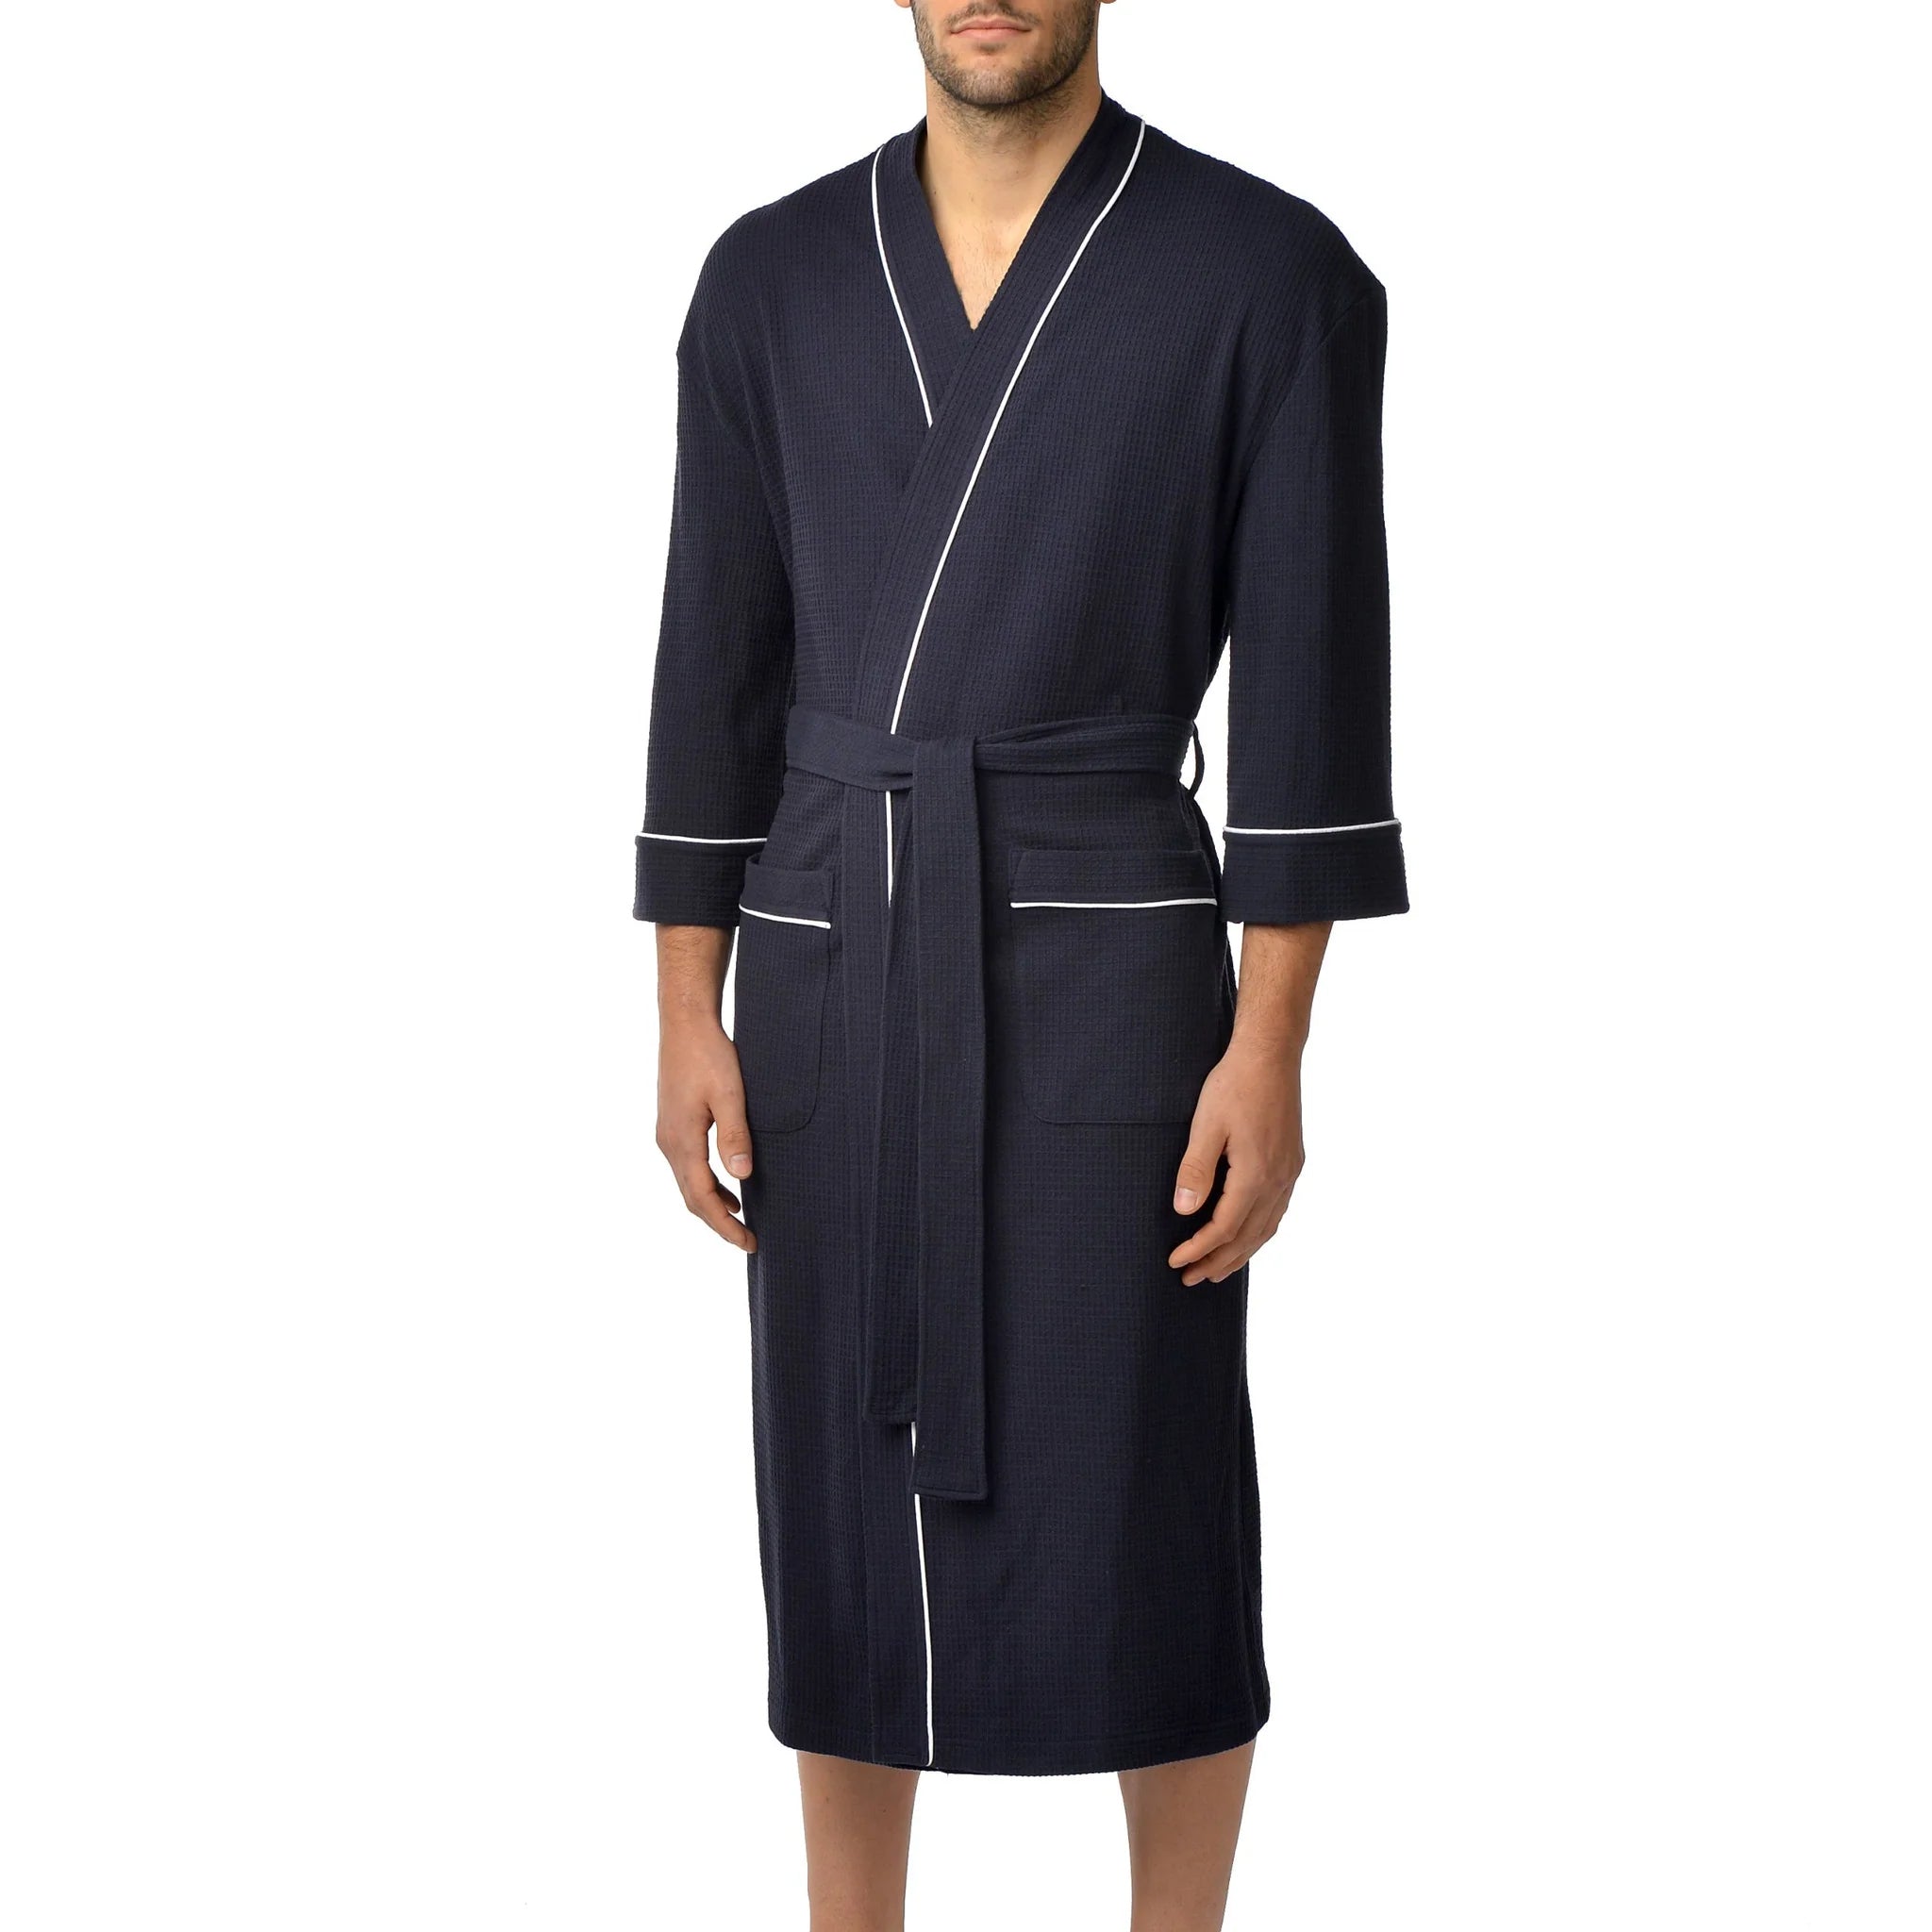 Majestic Waffle Knit Robe in Navy - Regulars